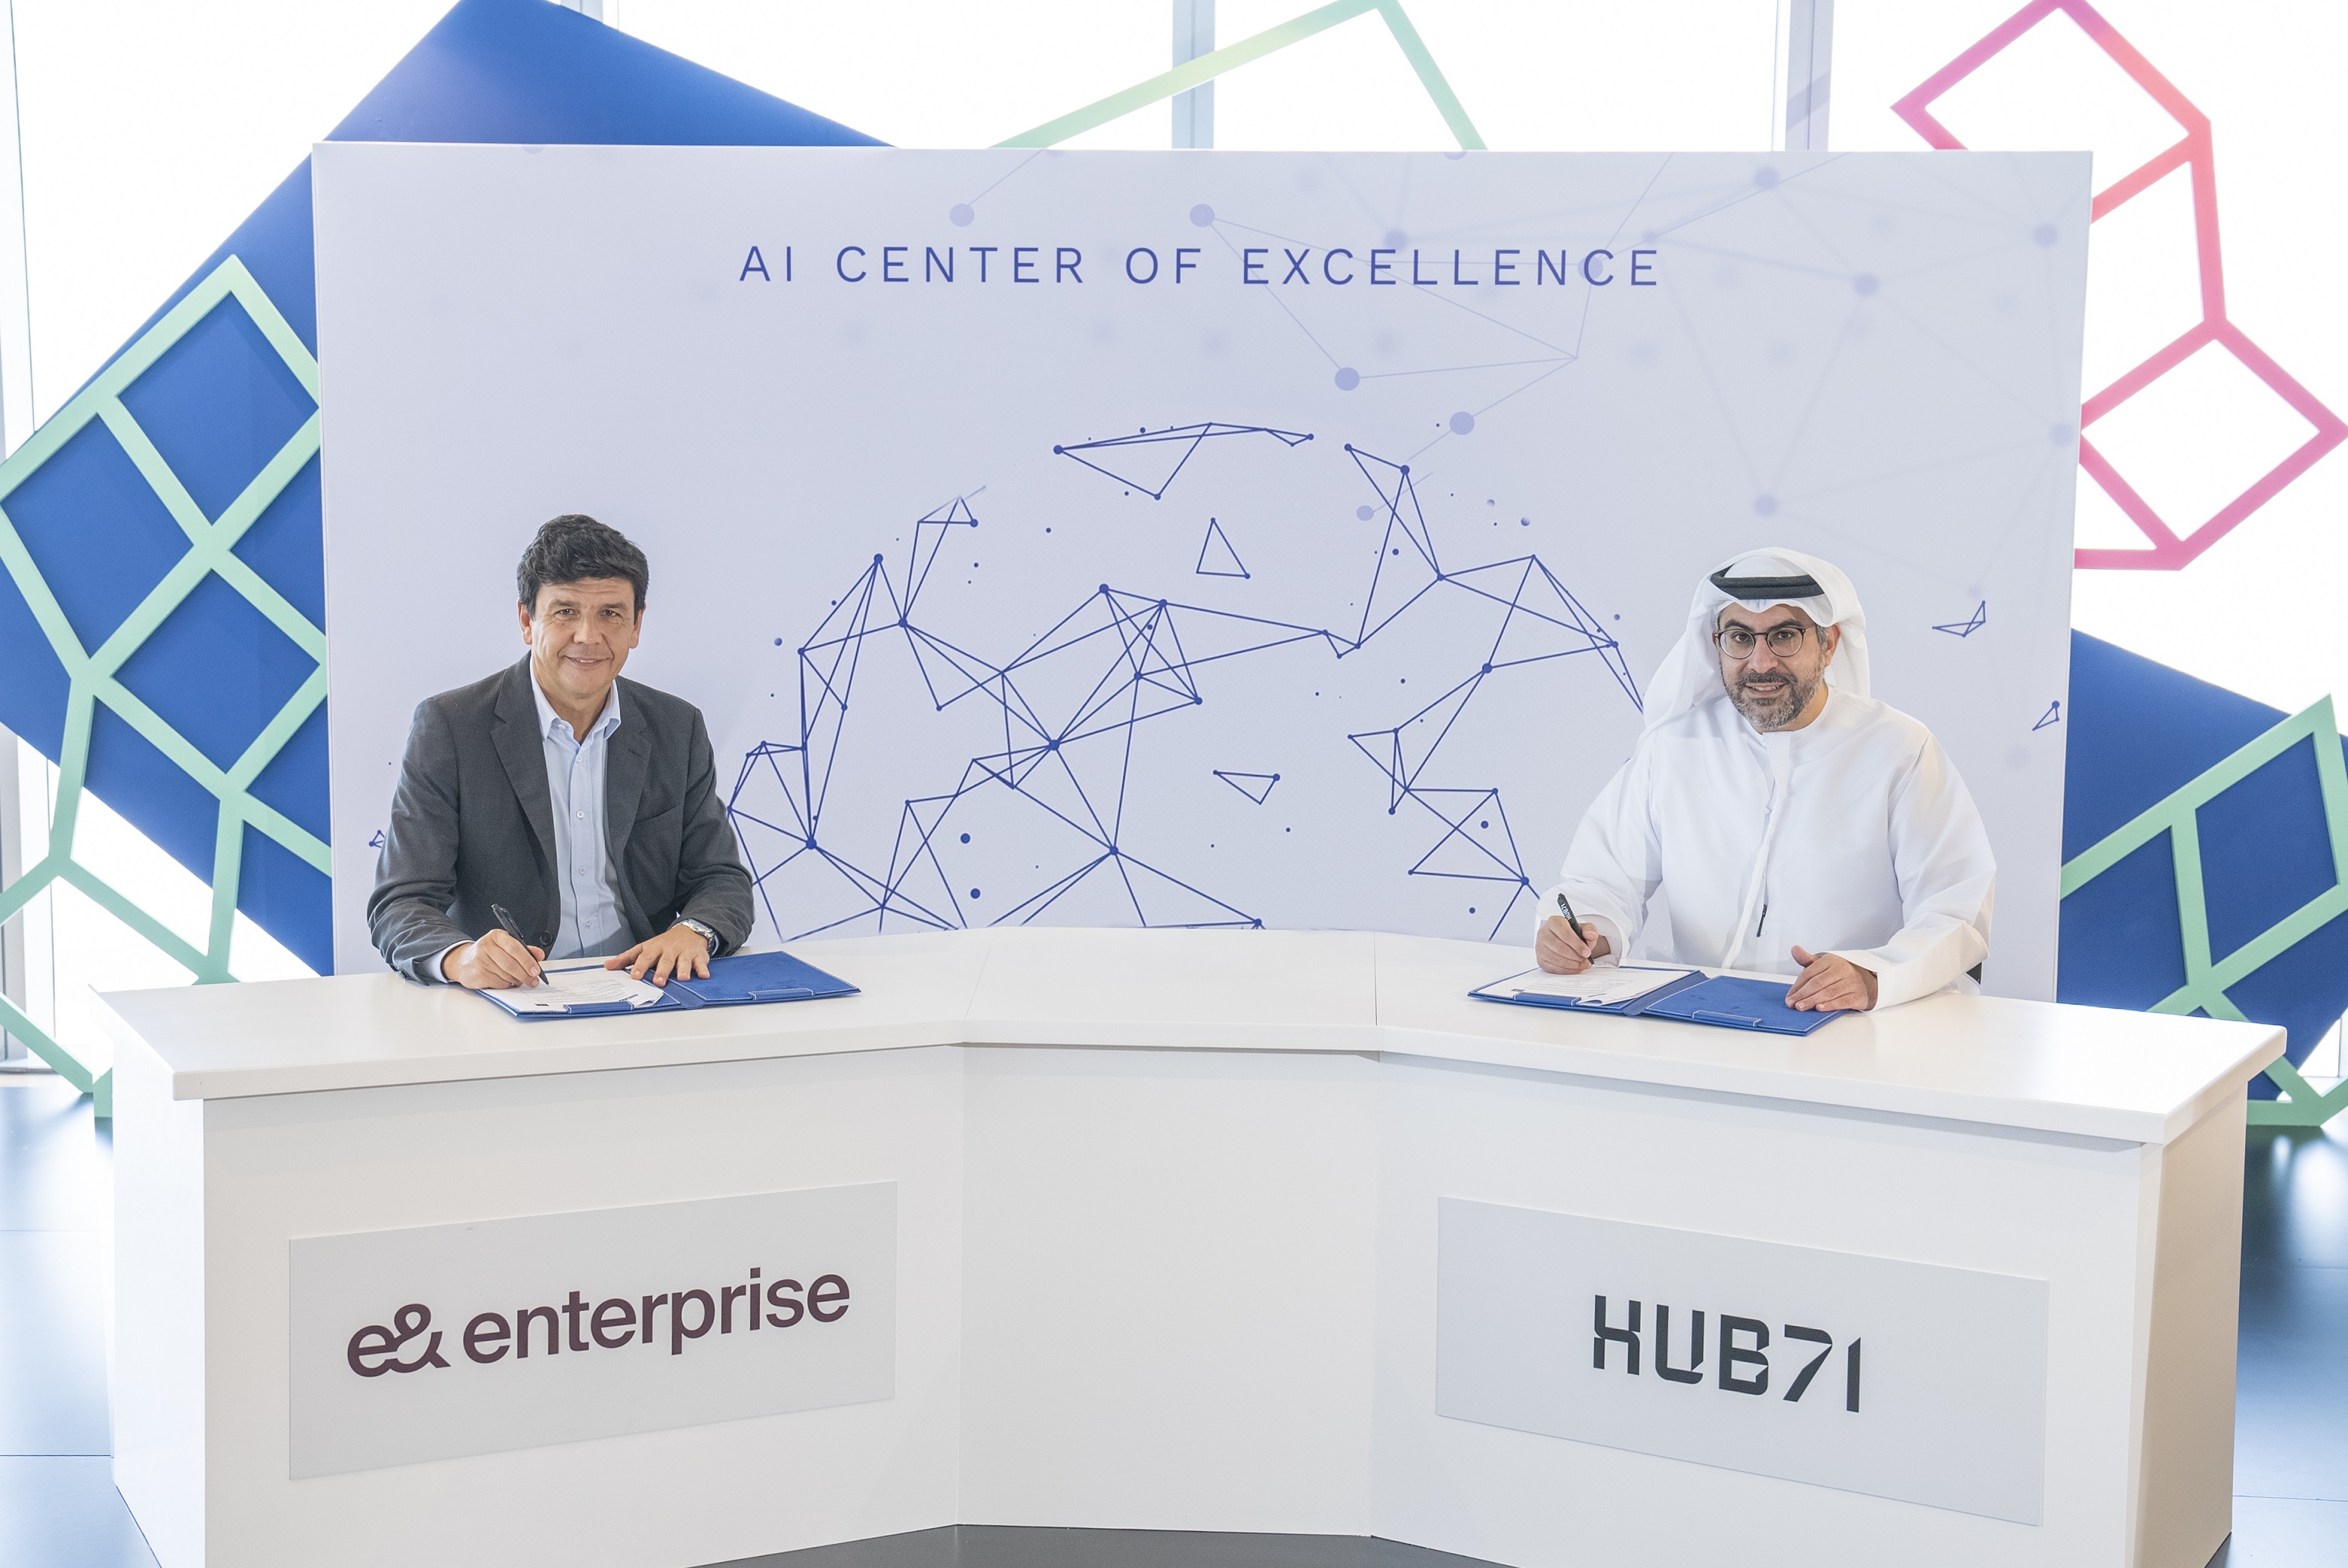 Hub71 And e& Enterprise To Launch The UAE’s First AI Center Of Excellence (AI CoE) In Abu Dhabi